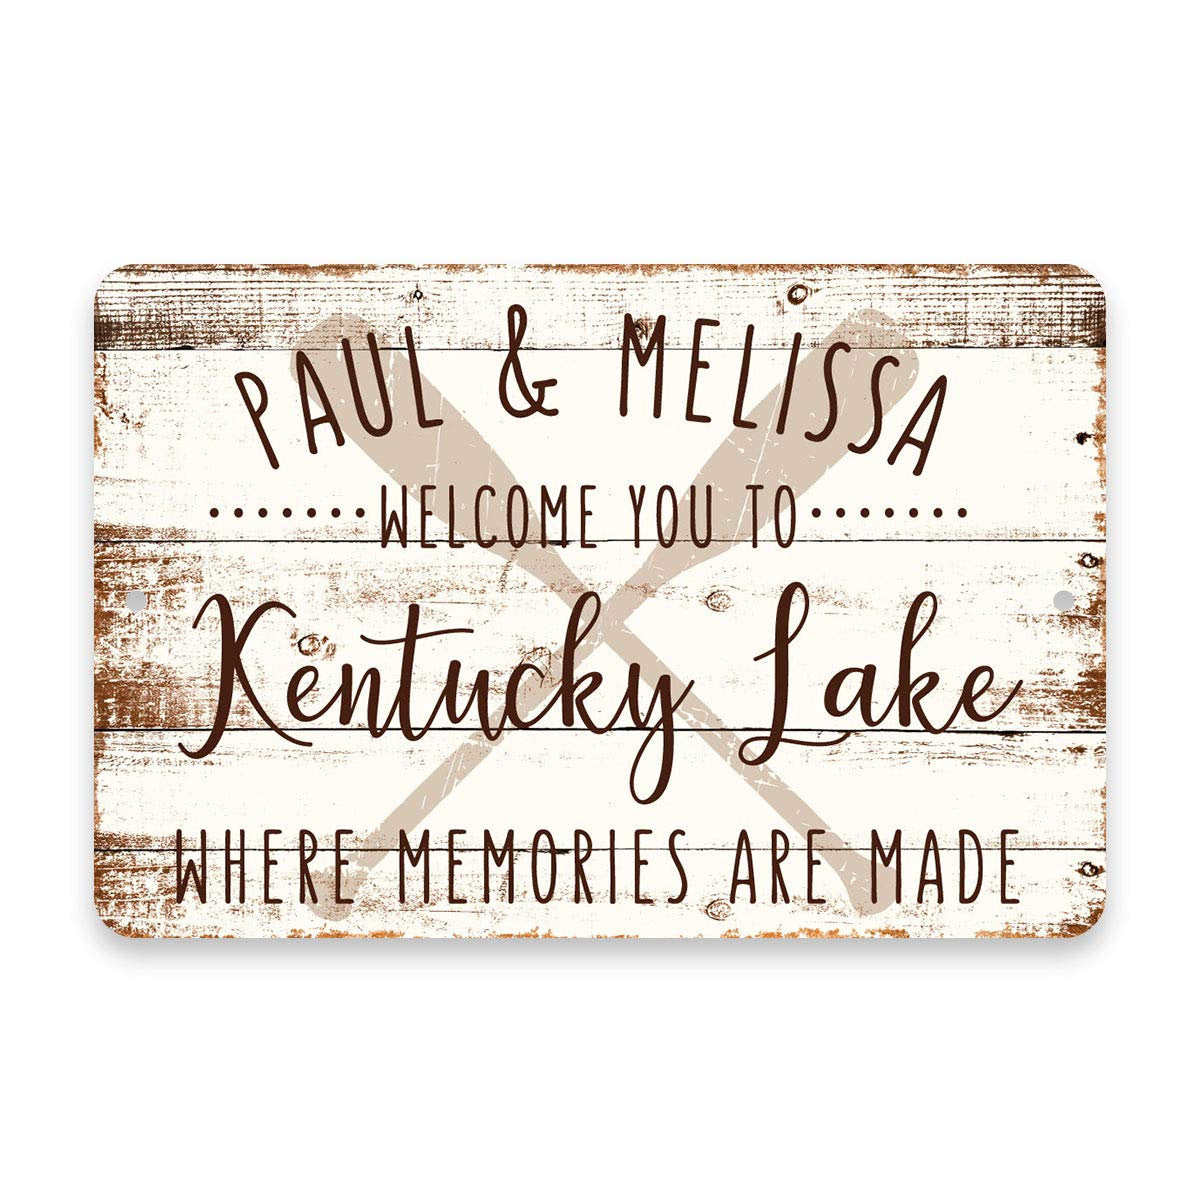 Personalized Welcome to Kentucky Lake Where Memories are Made Sign - 8 X 12 Metal Sign with Wood Look